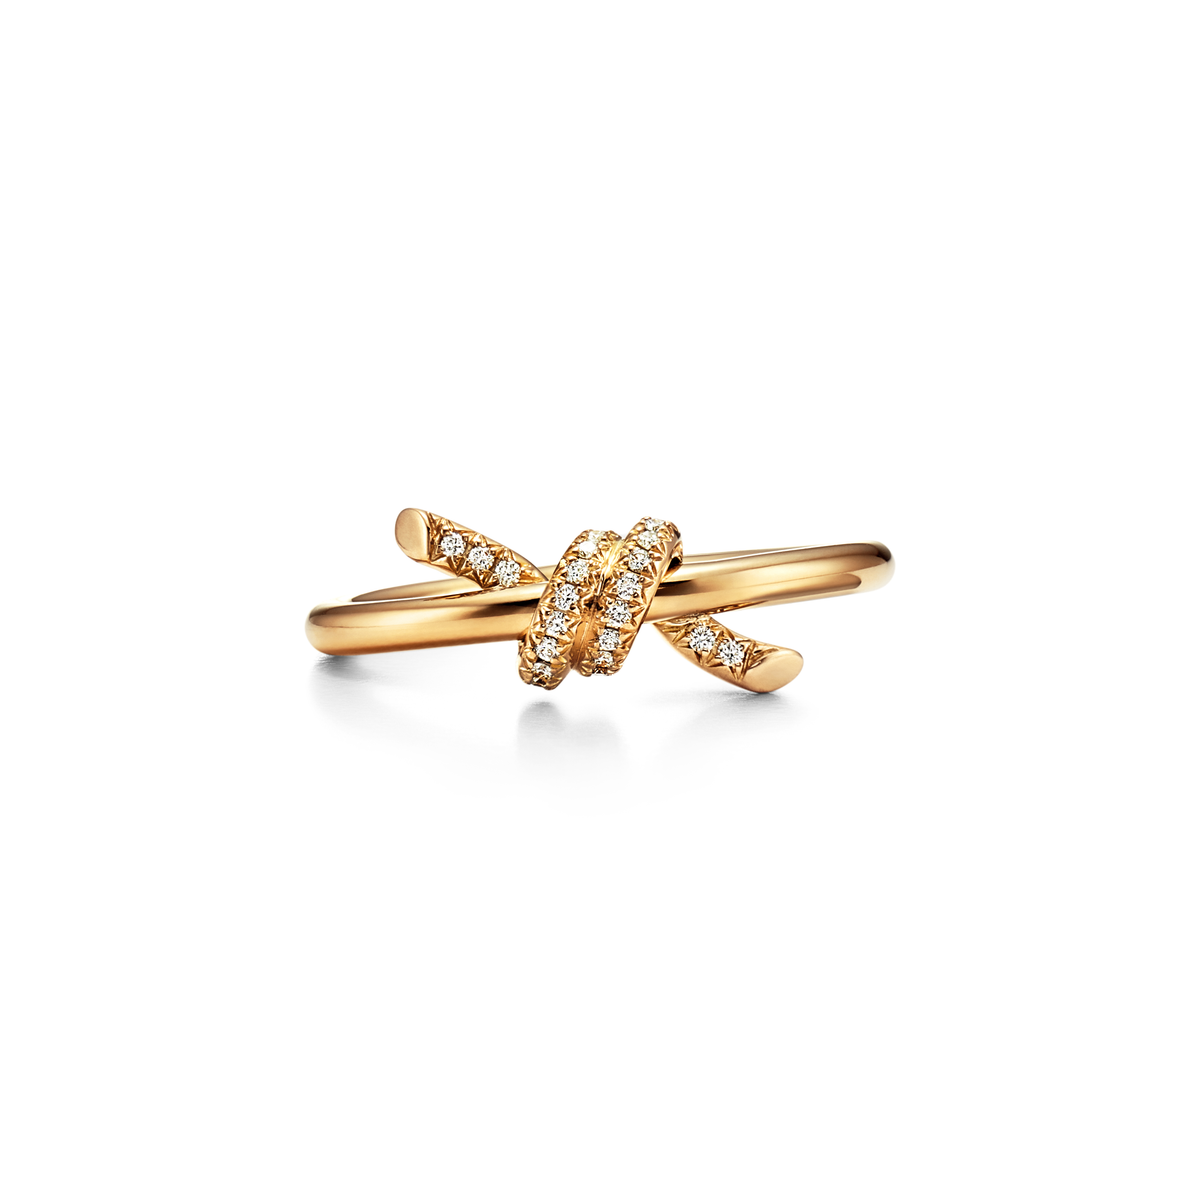 Tiffany Knot Ring in Yellow Gold with Diamonds